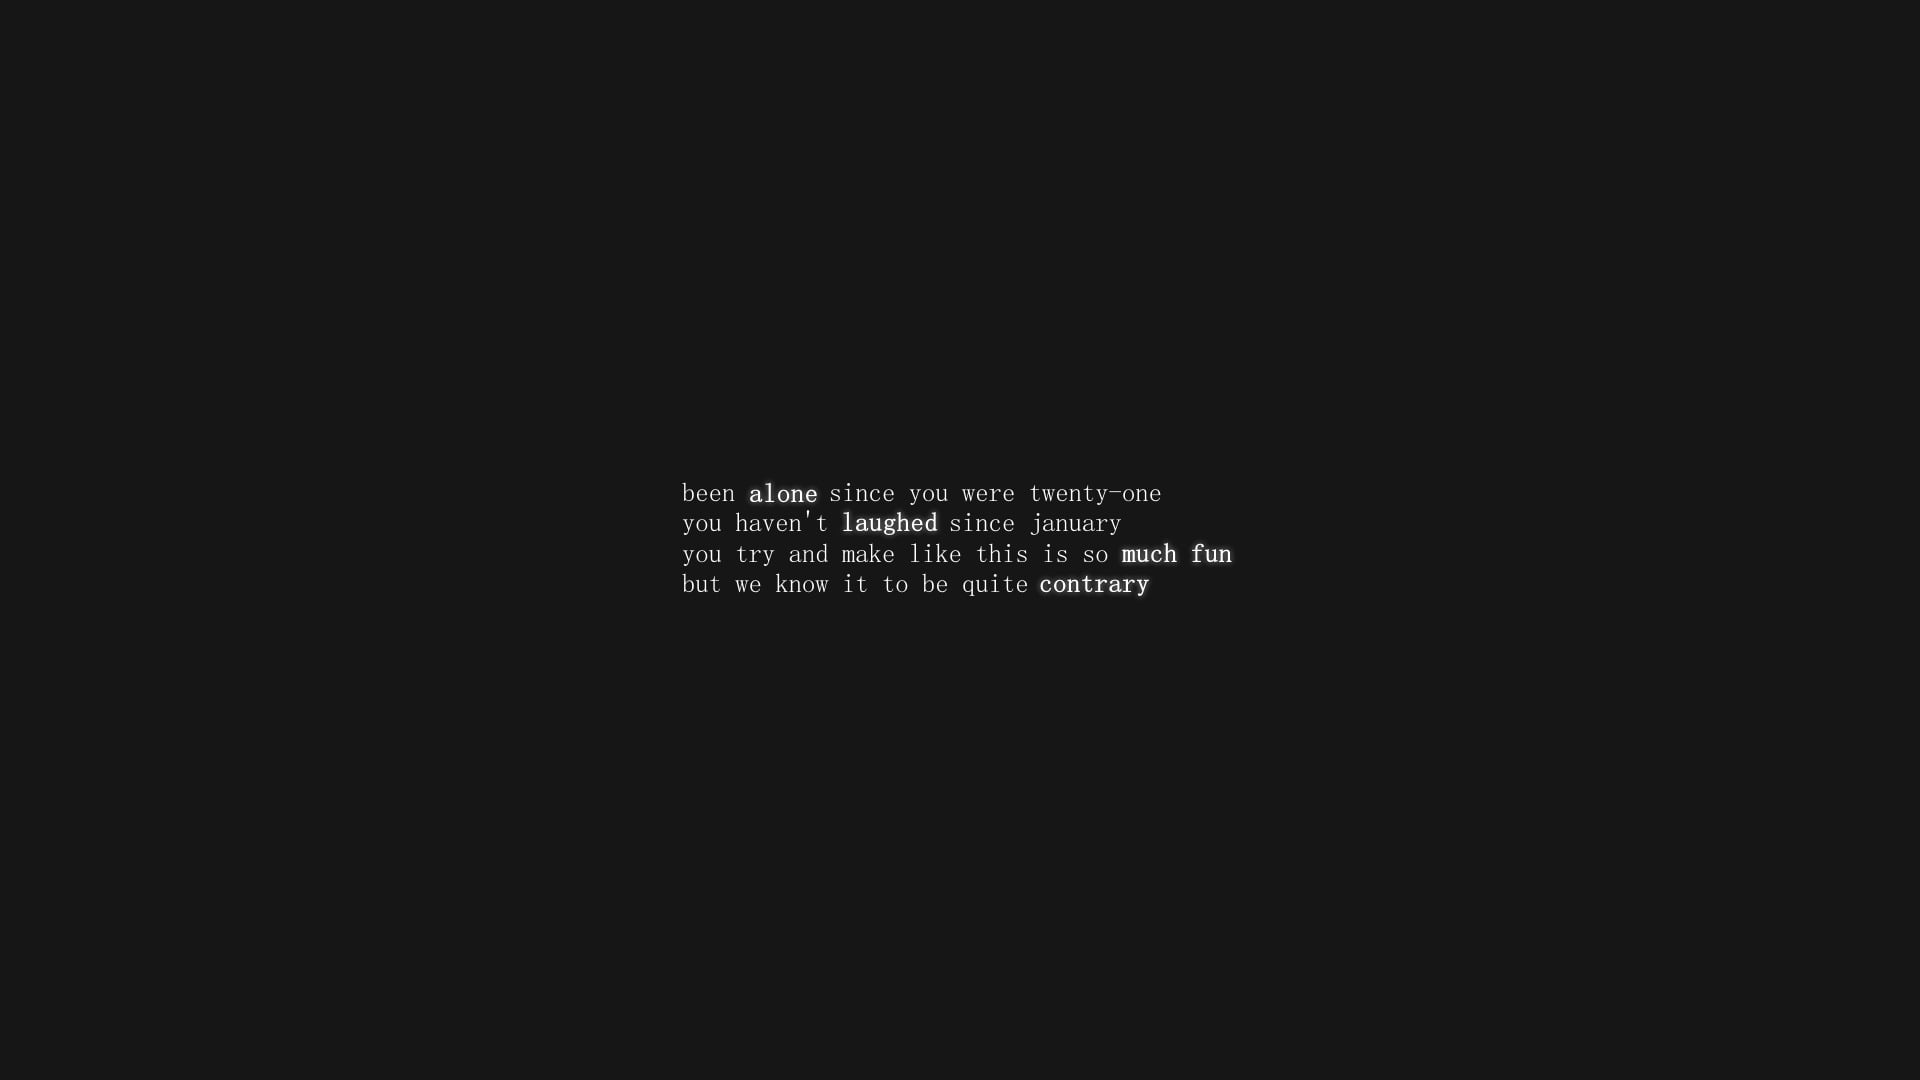 white text on black background, music, The Shins, song, quote